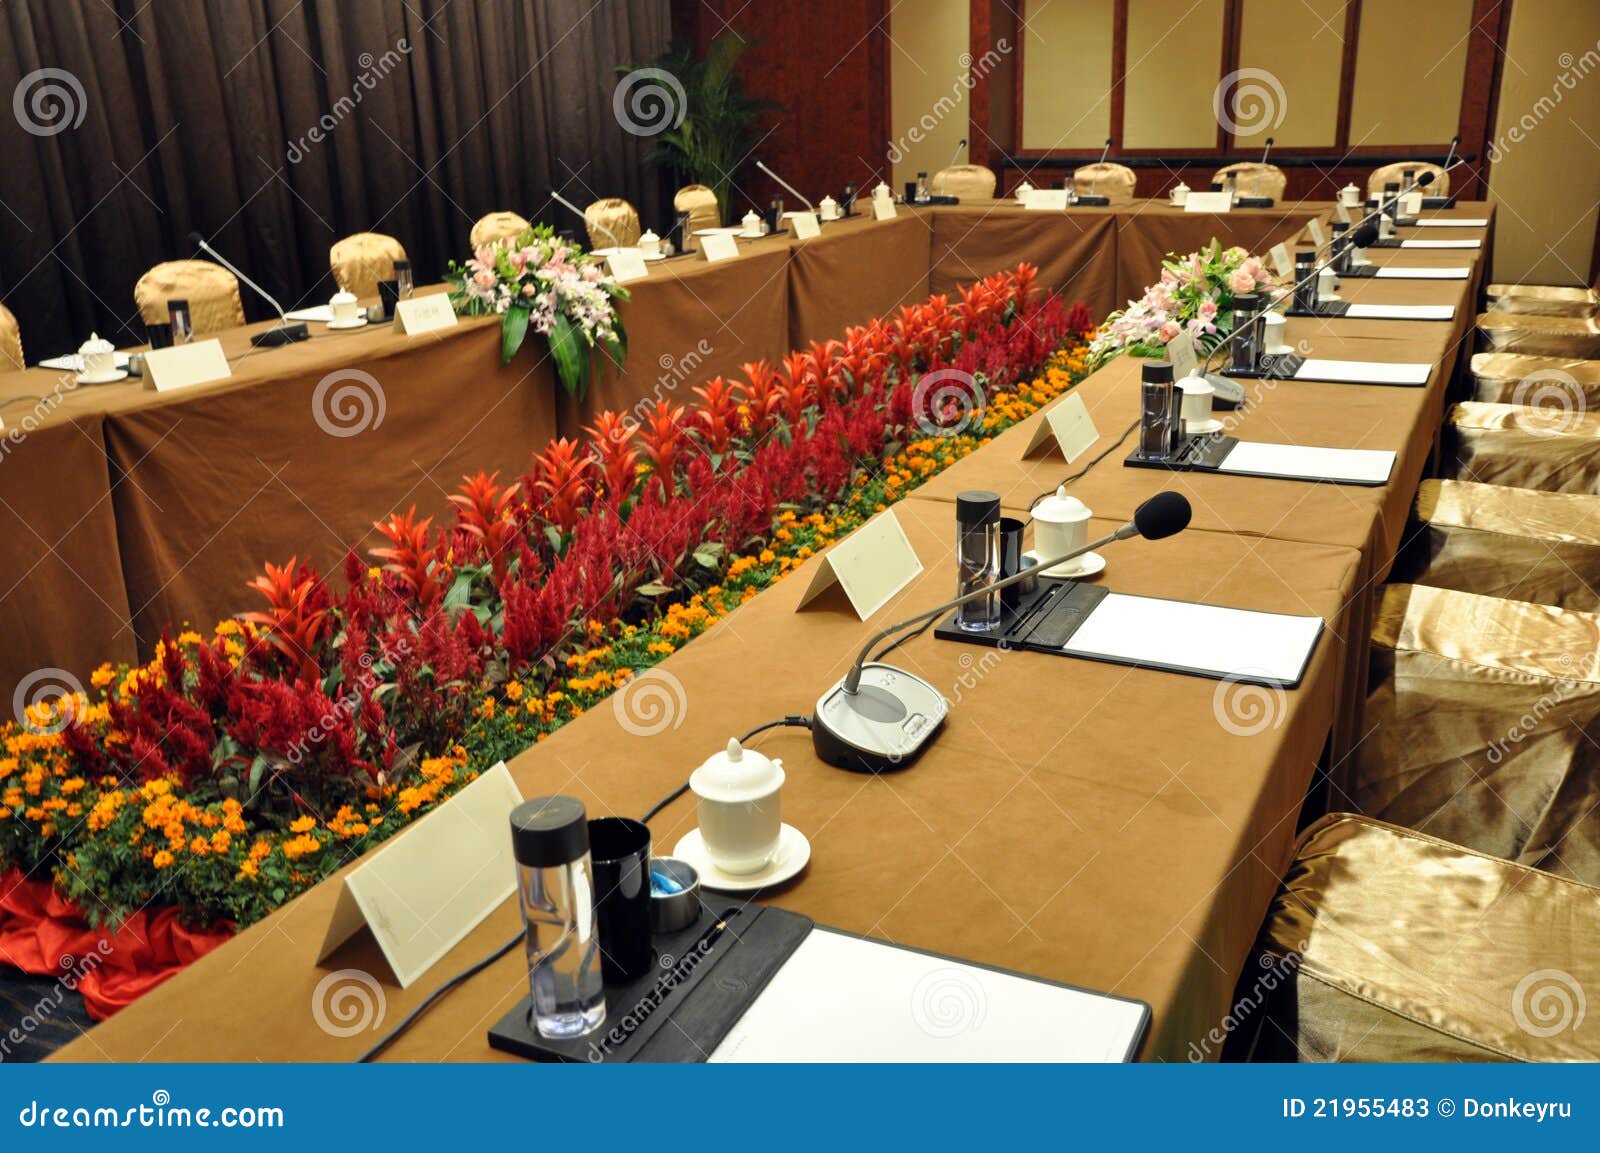 8,940 Conference Decoration Stock Photos - Free & Royalty-Free ...